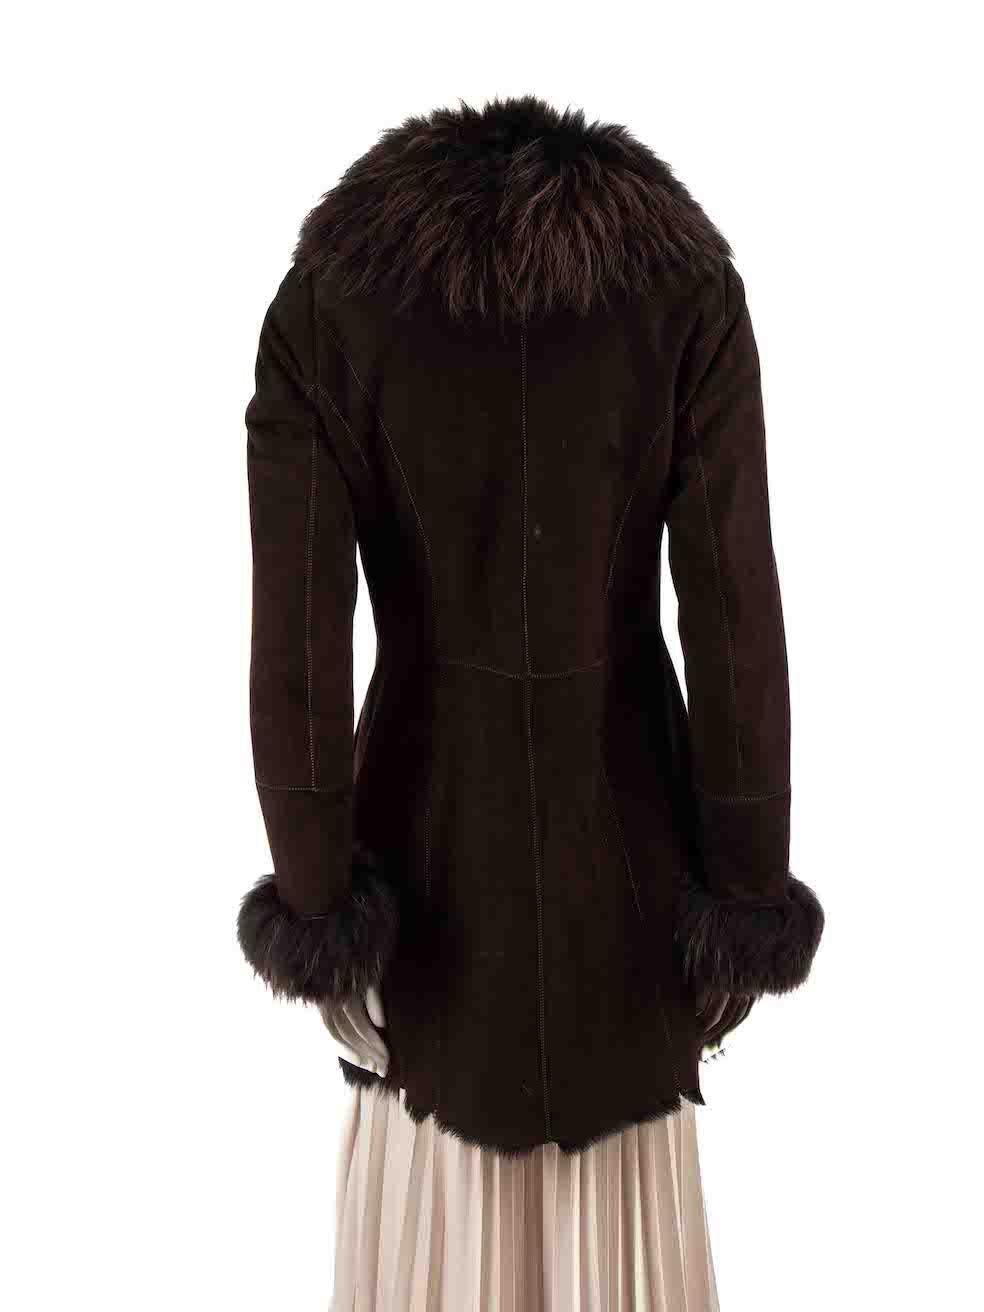 Bond Bonny Brown Suede Fur Trimmed Shearling Coat Size S In Good Condition For Sale In London, GB